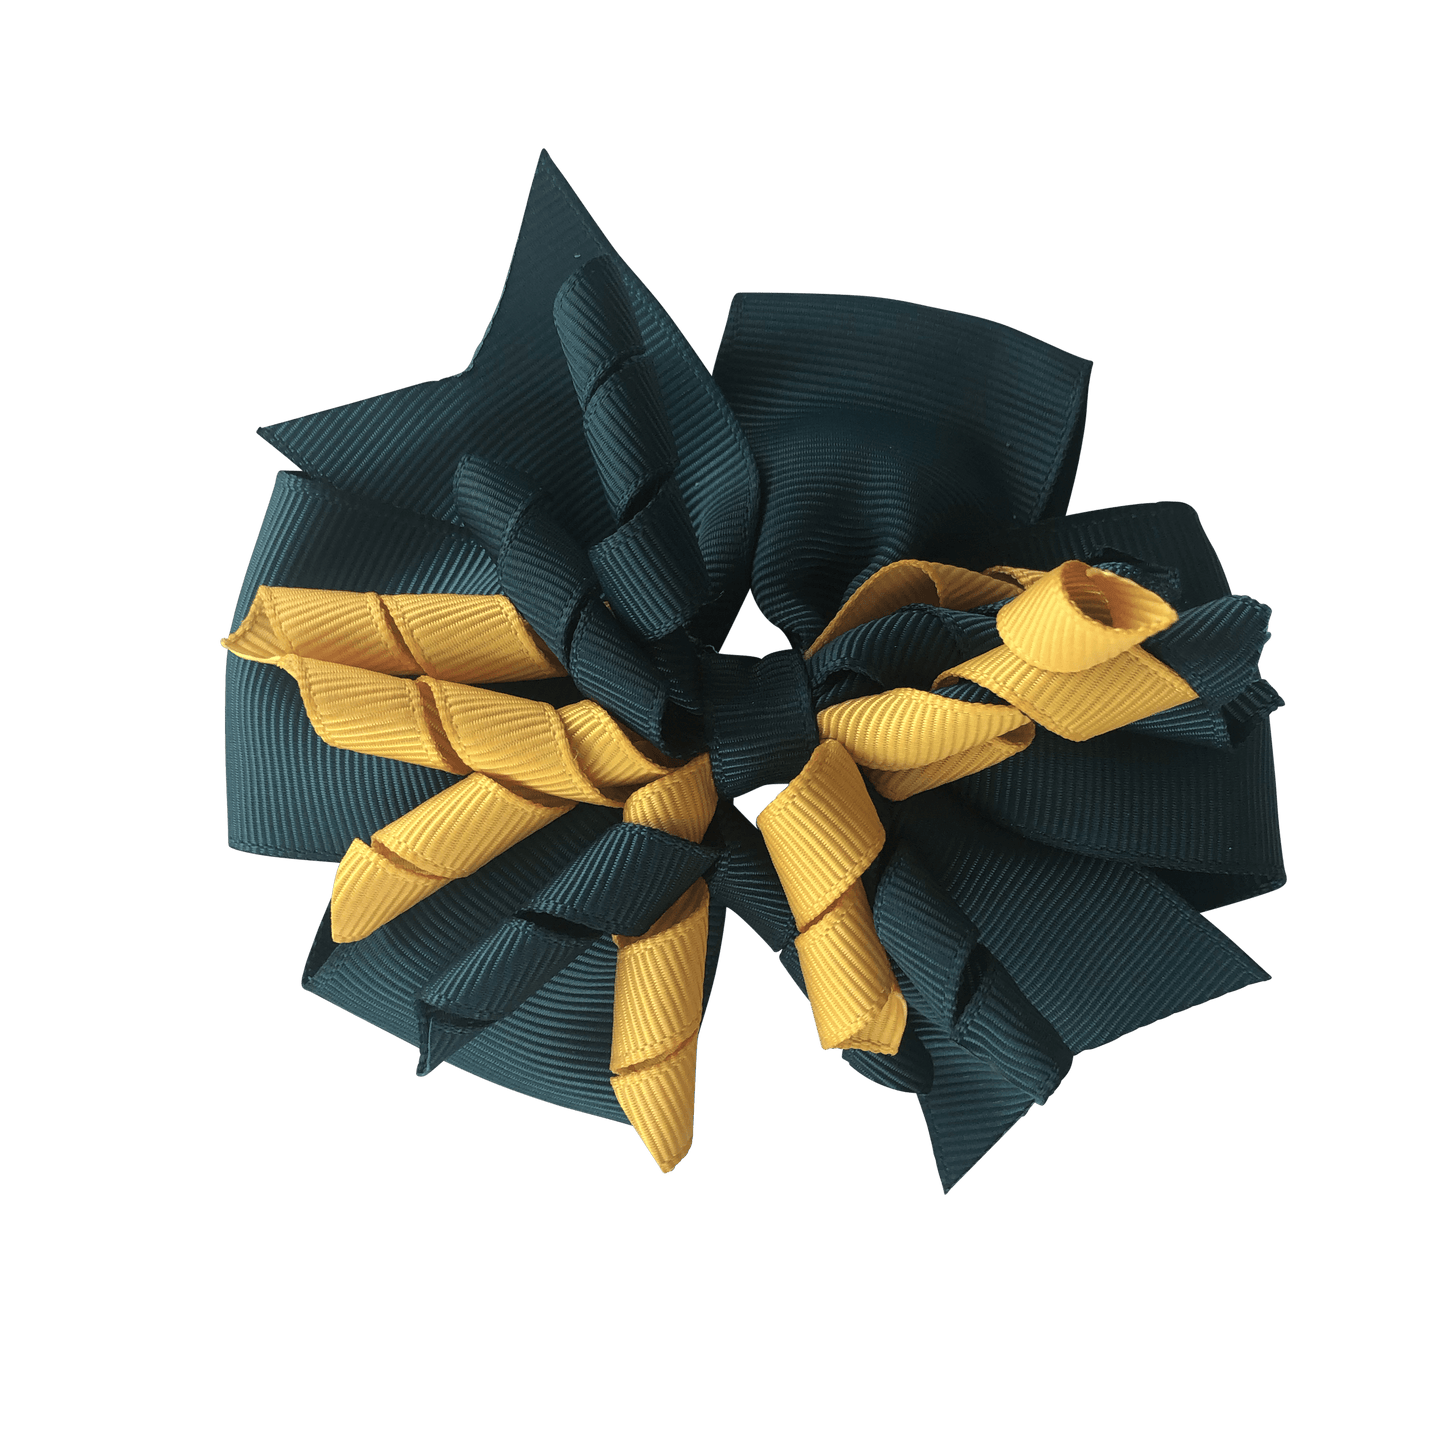 Darkest Petrol Green & Gold Hair Accessories - Ponytails and Fairytales